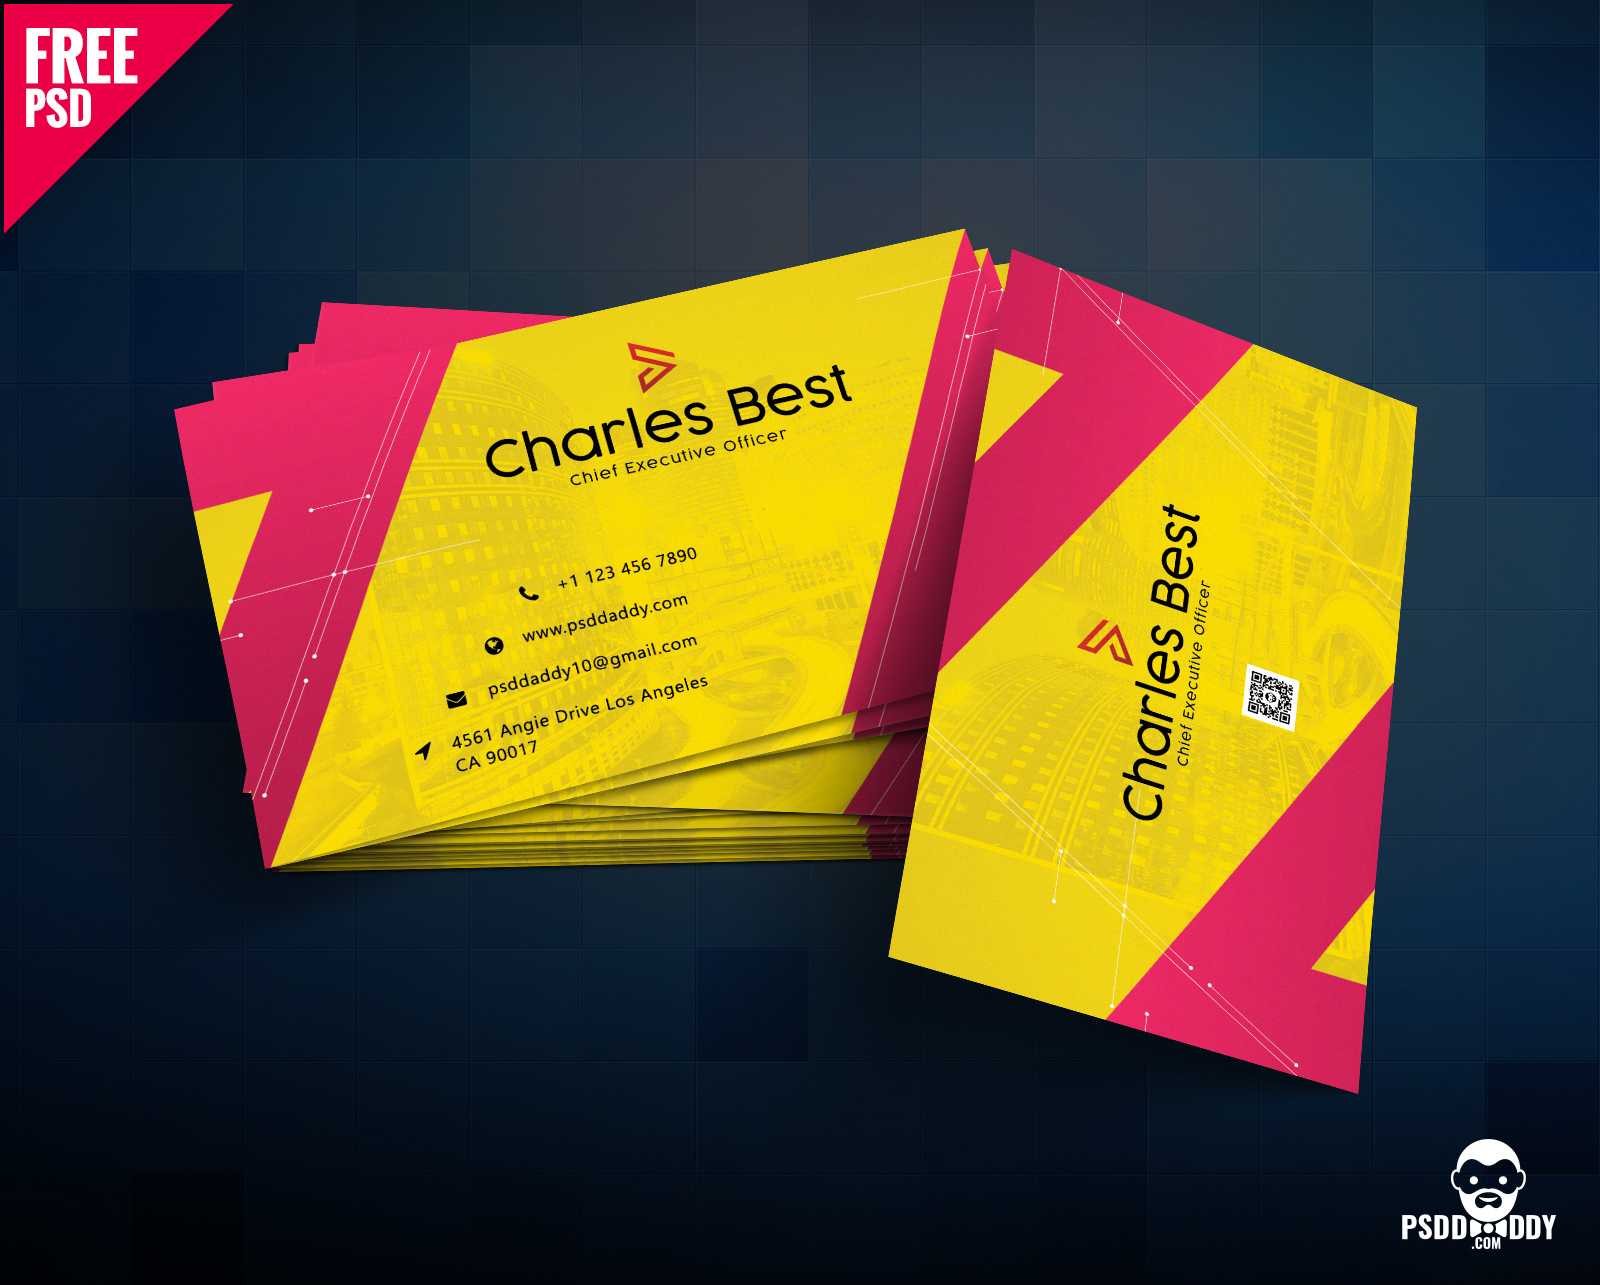 Download] Creative Business Card Free Psd | Psddaddy Intended For Visiting Card Templates For Photoshop